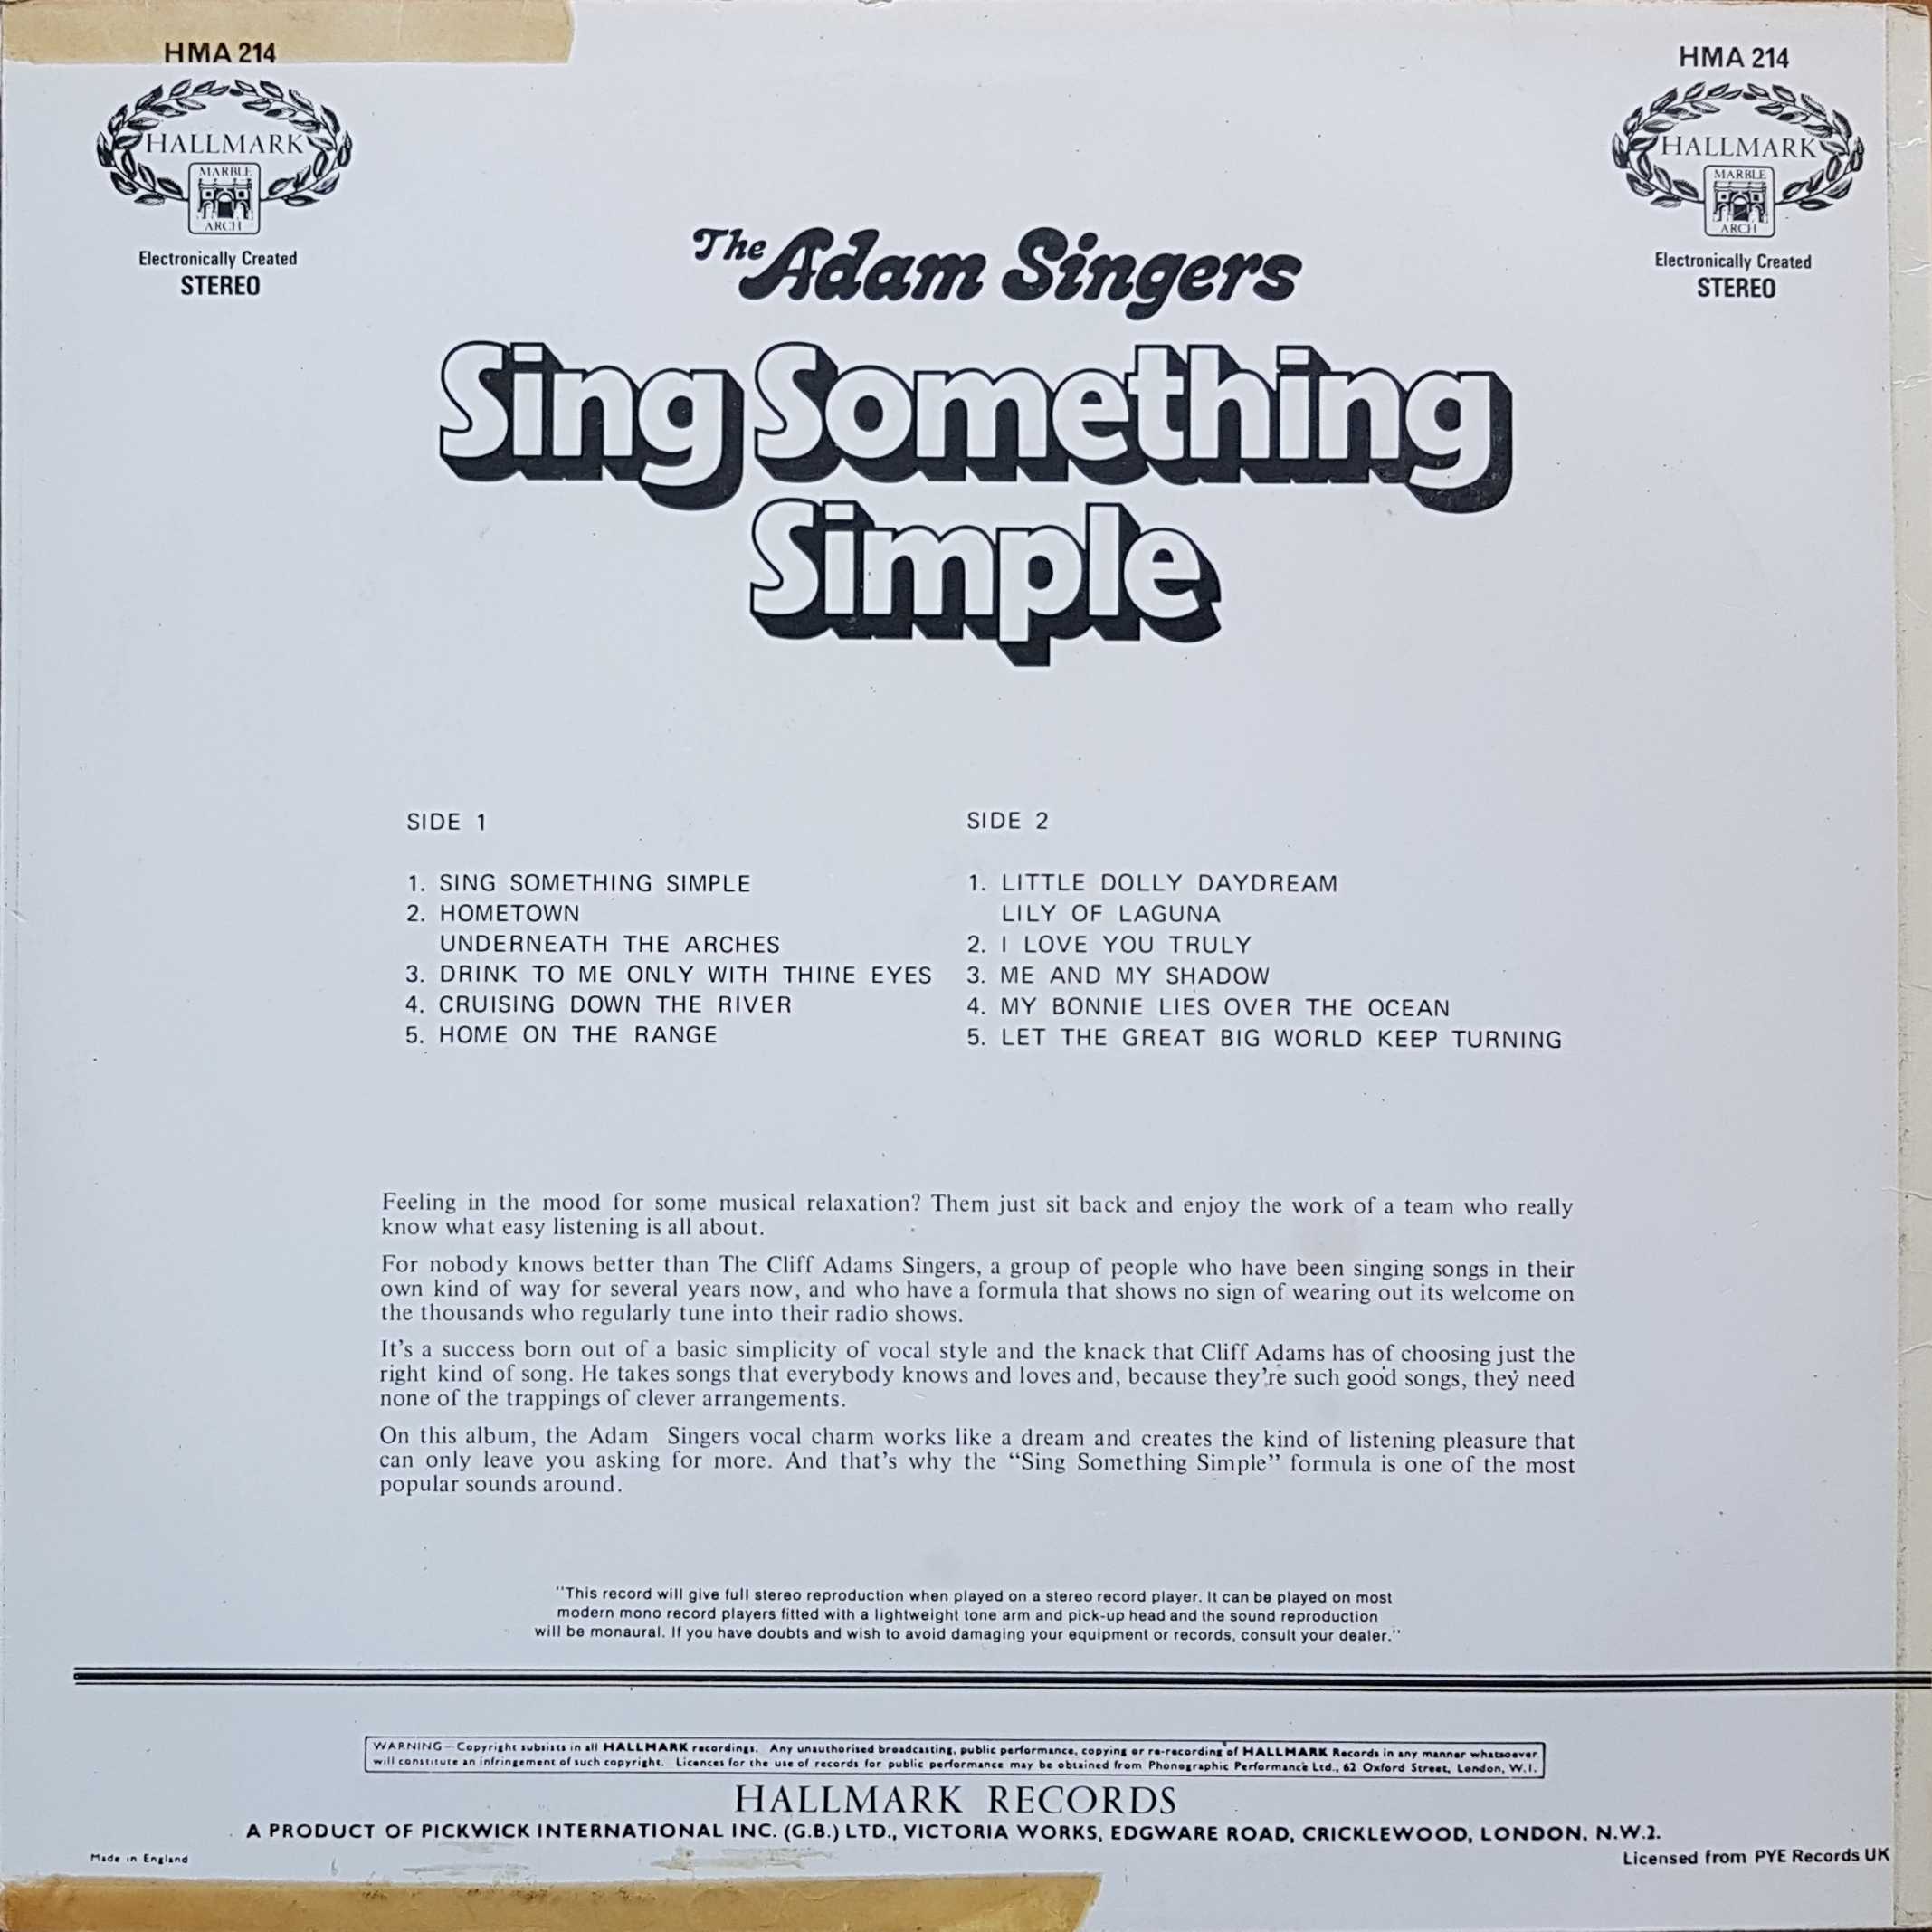 Picture of HMA 214 Sing something simple by artist Various from the BBC records and Tapes library